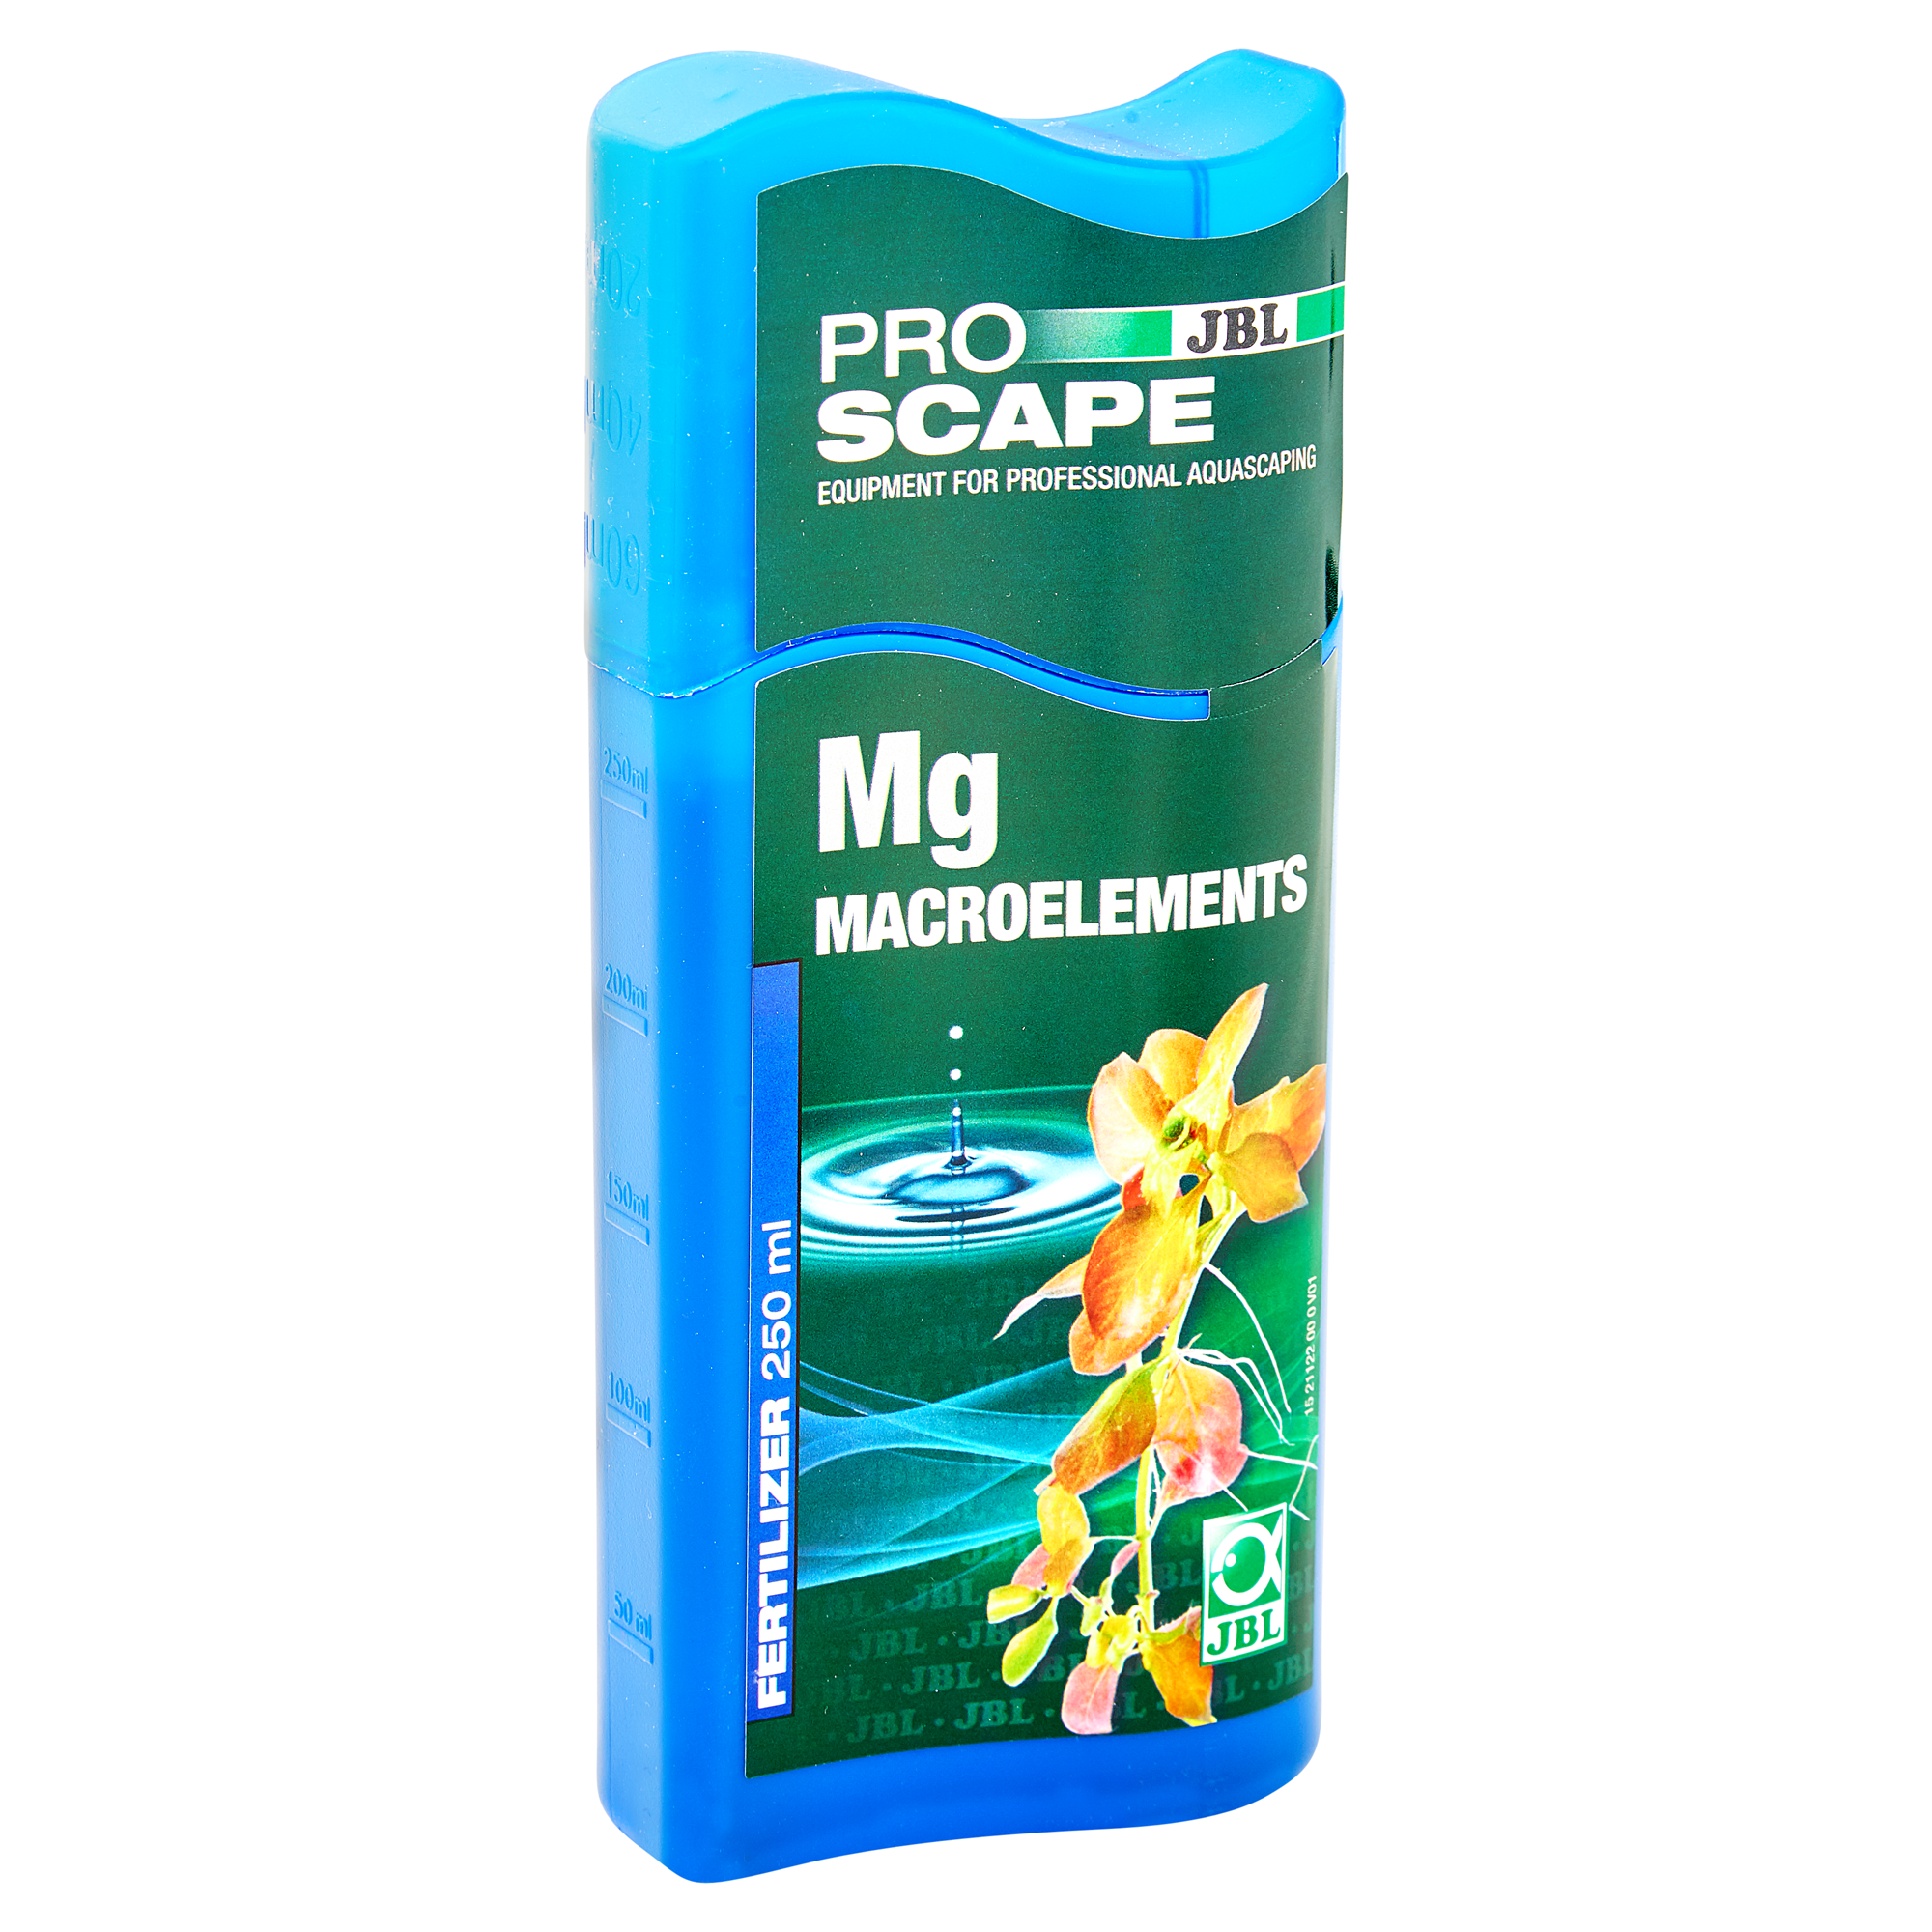 Pflanzendünger "Pro Scape" Mg Macroelements 250 ml + product picture